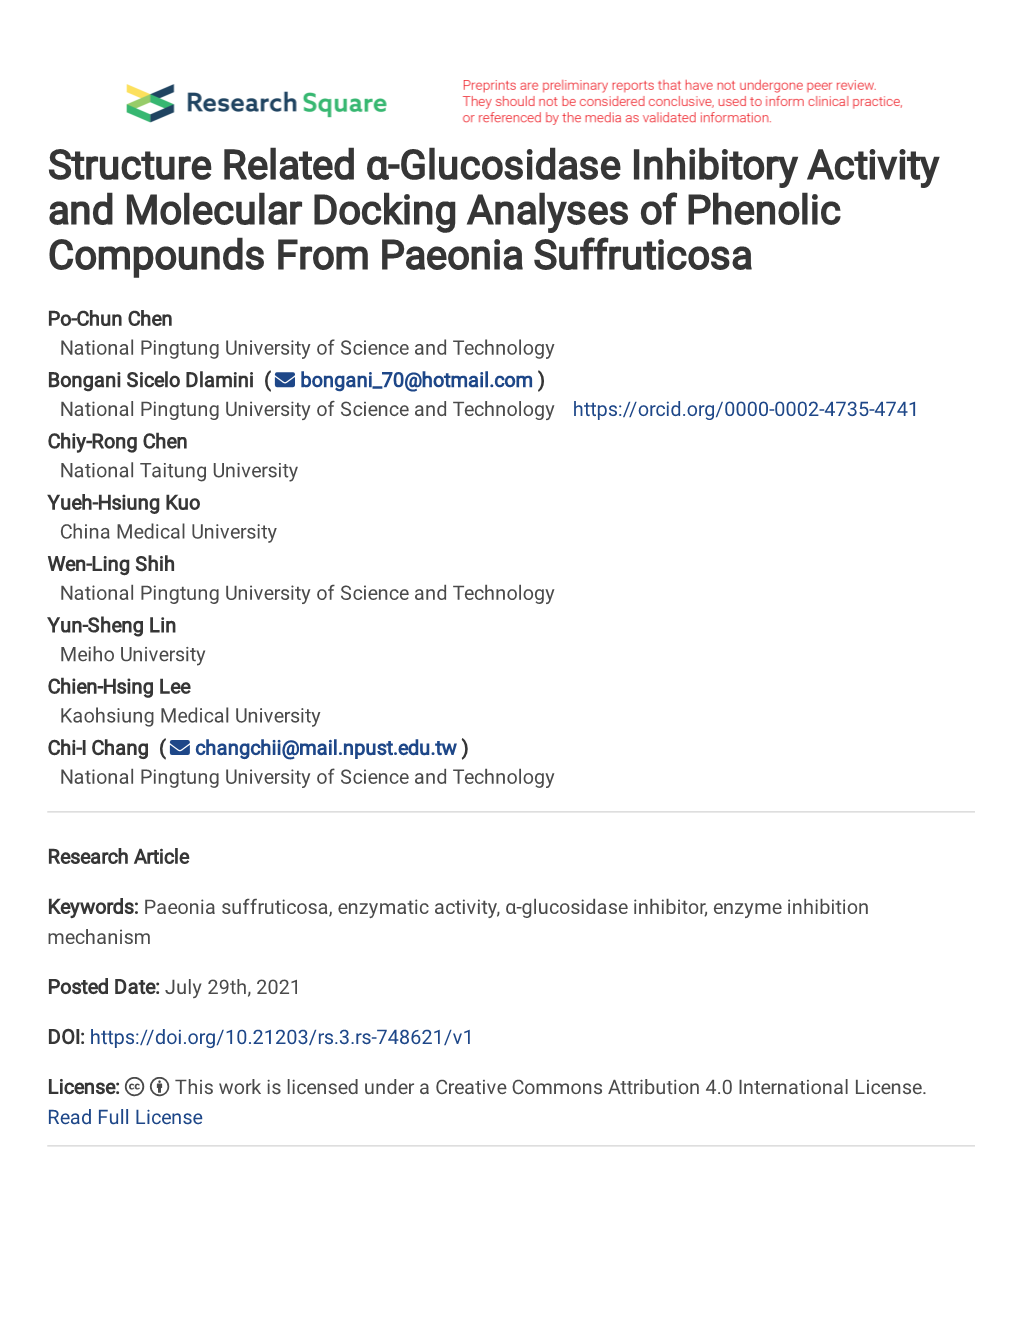 Structure Related Α-Glucosidase Inhibitory Activity and Molecular Docking Analyses of Phenolic Compounds from Paeonia Suffruticosa